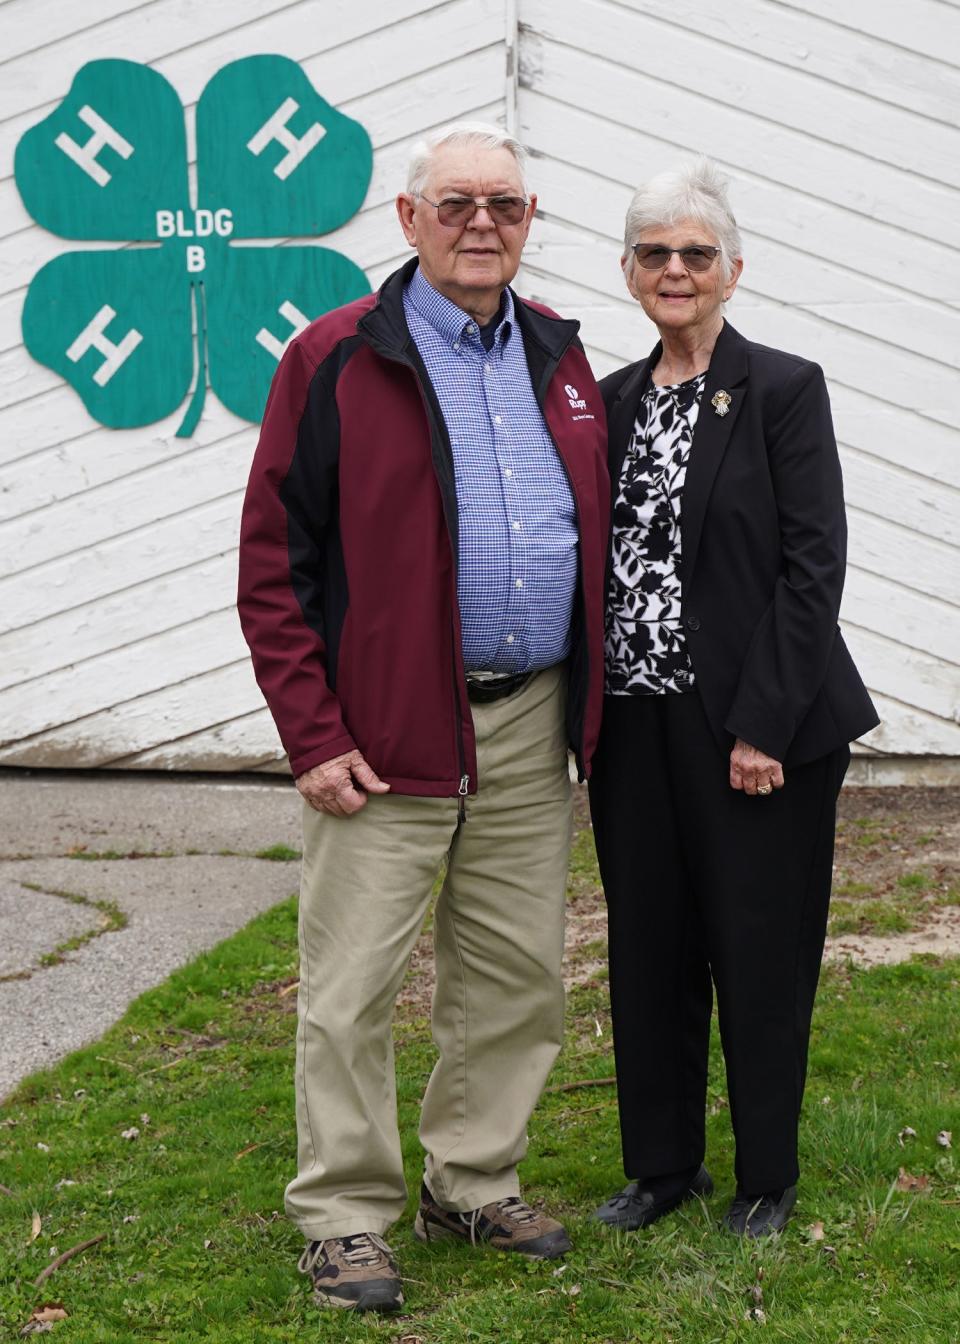 Larry and Joan Gould have known each other since they were 10 years old from 4-H circles. Both of their families were heavily involved in 4-H. It was not until the two volunteered as chaperones for a 4-H youth trip that they began dating. Larry Gould was also a county commissioner for more than 30 years.